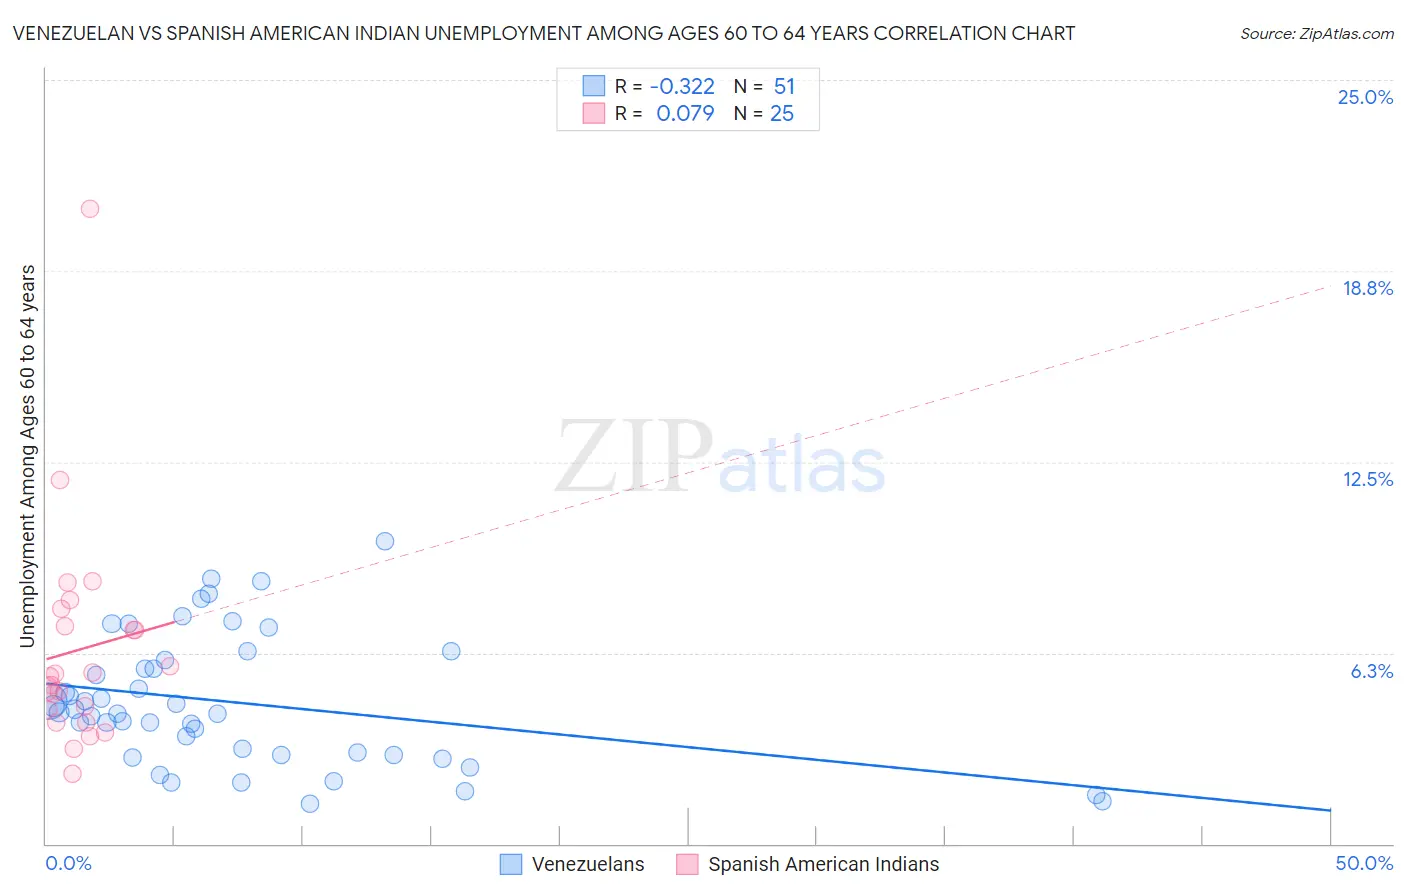 Venezuelan vs Spanish American Indian Unemployment Among Ages 60 to 64 years